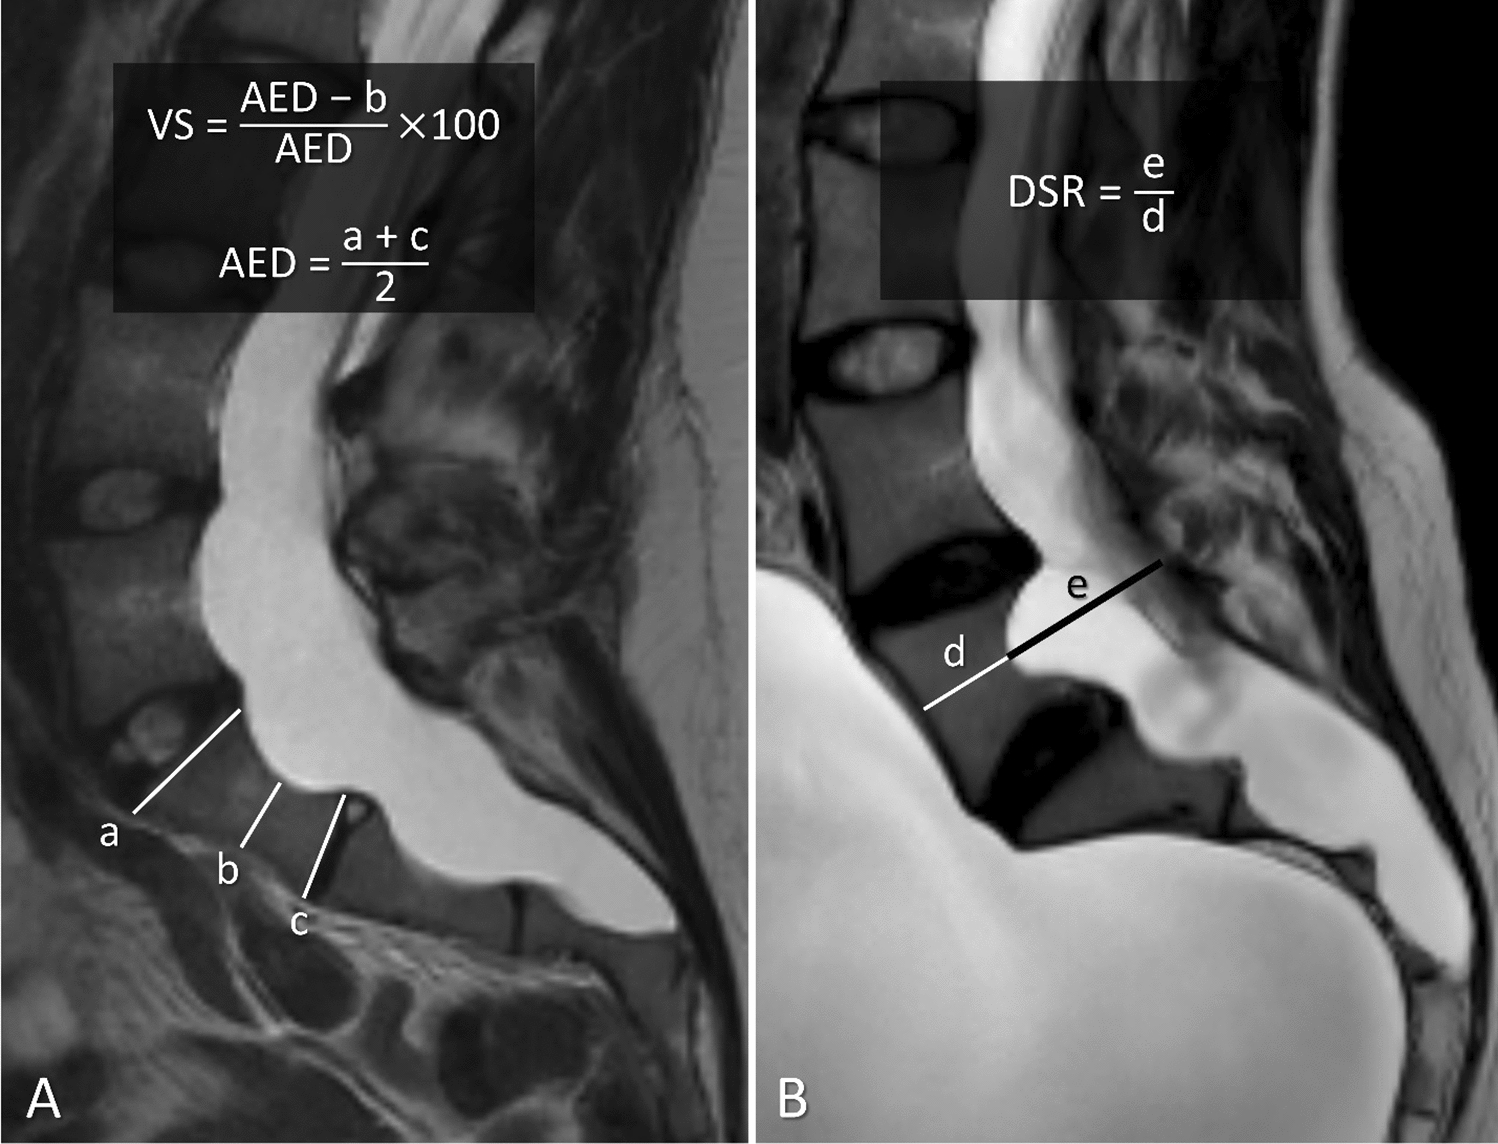 Quantitative measurement of dural ectasia: associations with clinical and genetic characteristics in Marfan syndrome